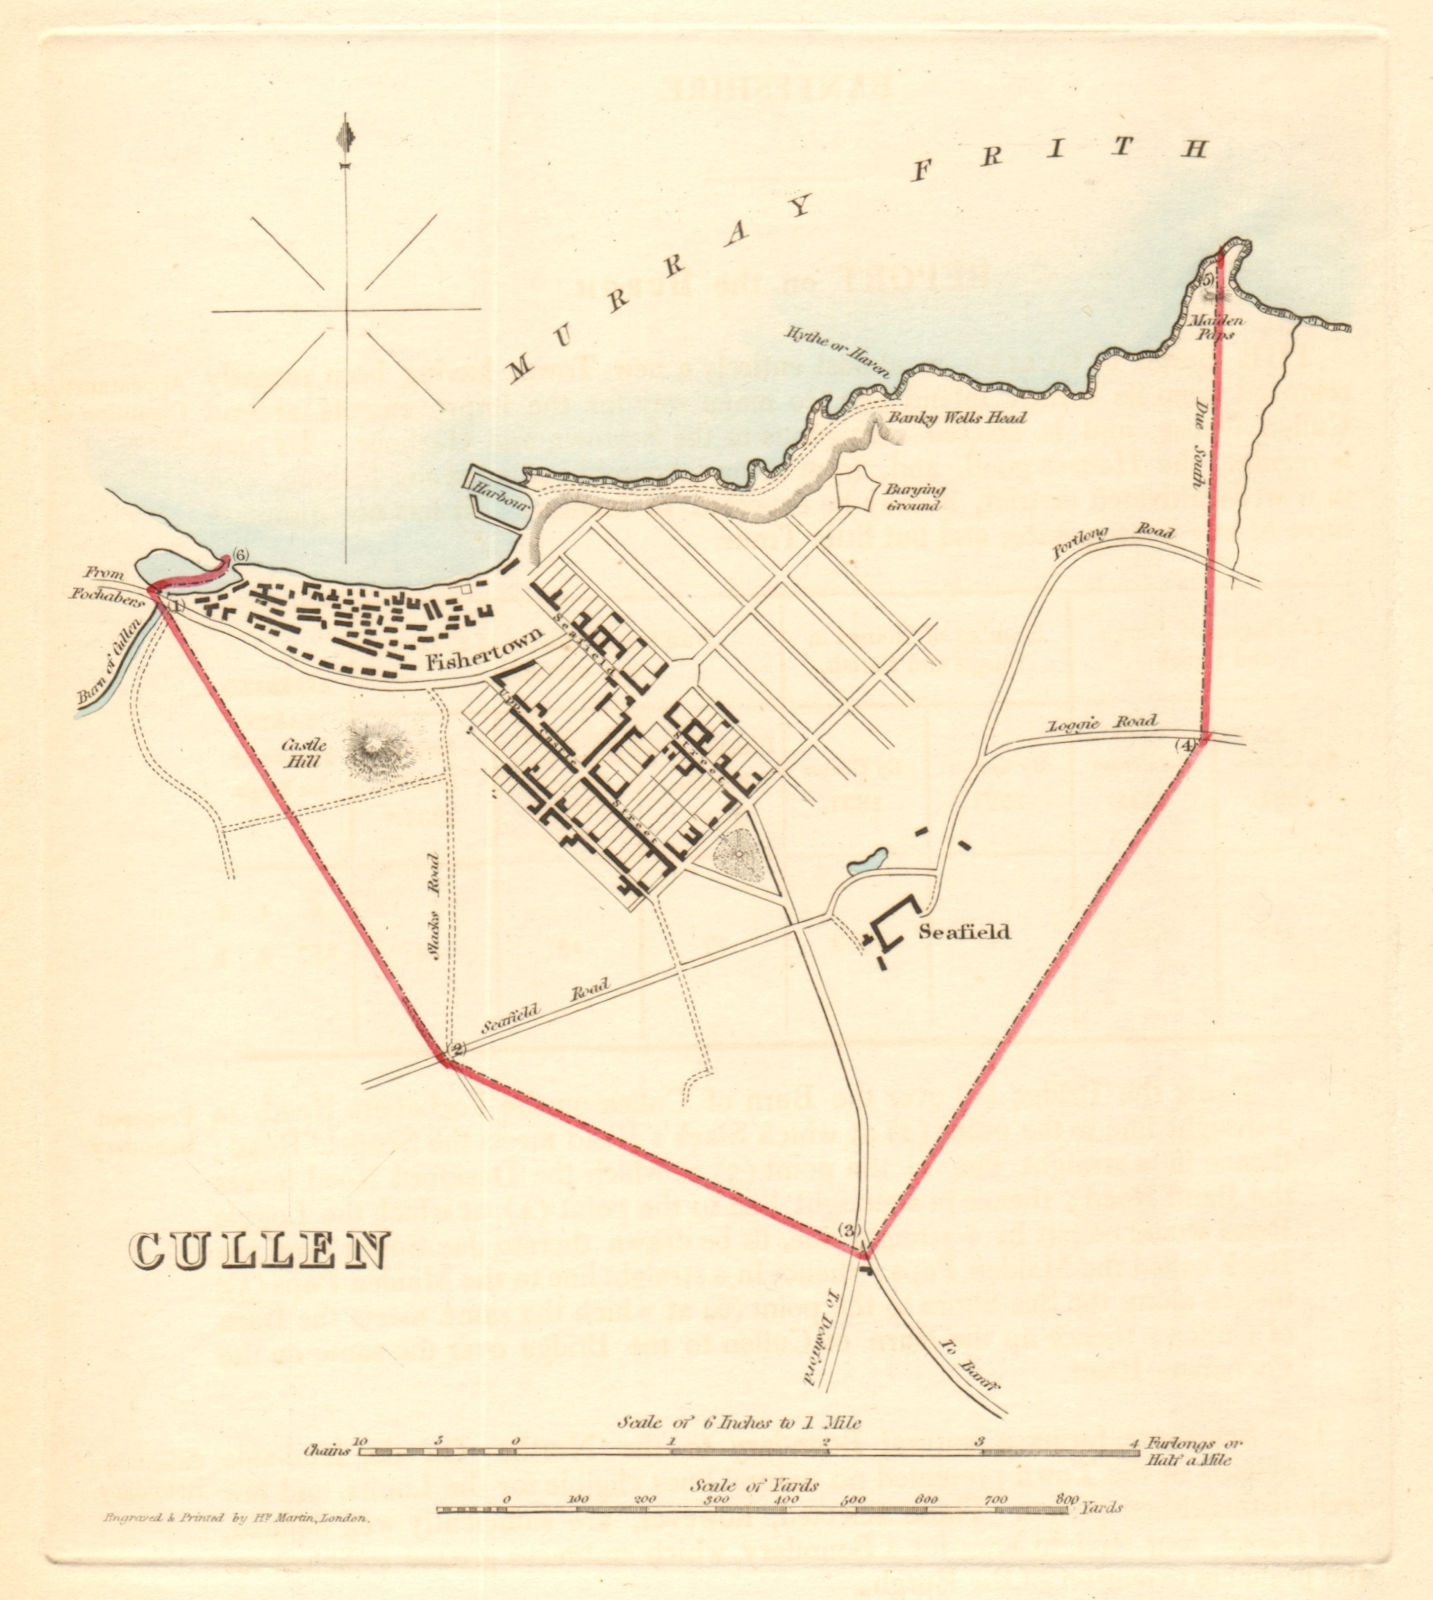 Associate Product CULLEN borough/town plan for the REFORM ACT. Moray, Scotland. DAWSON 1832 map